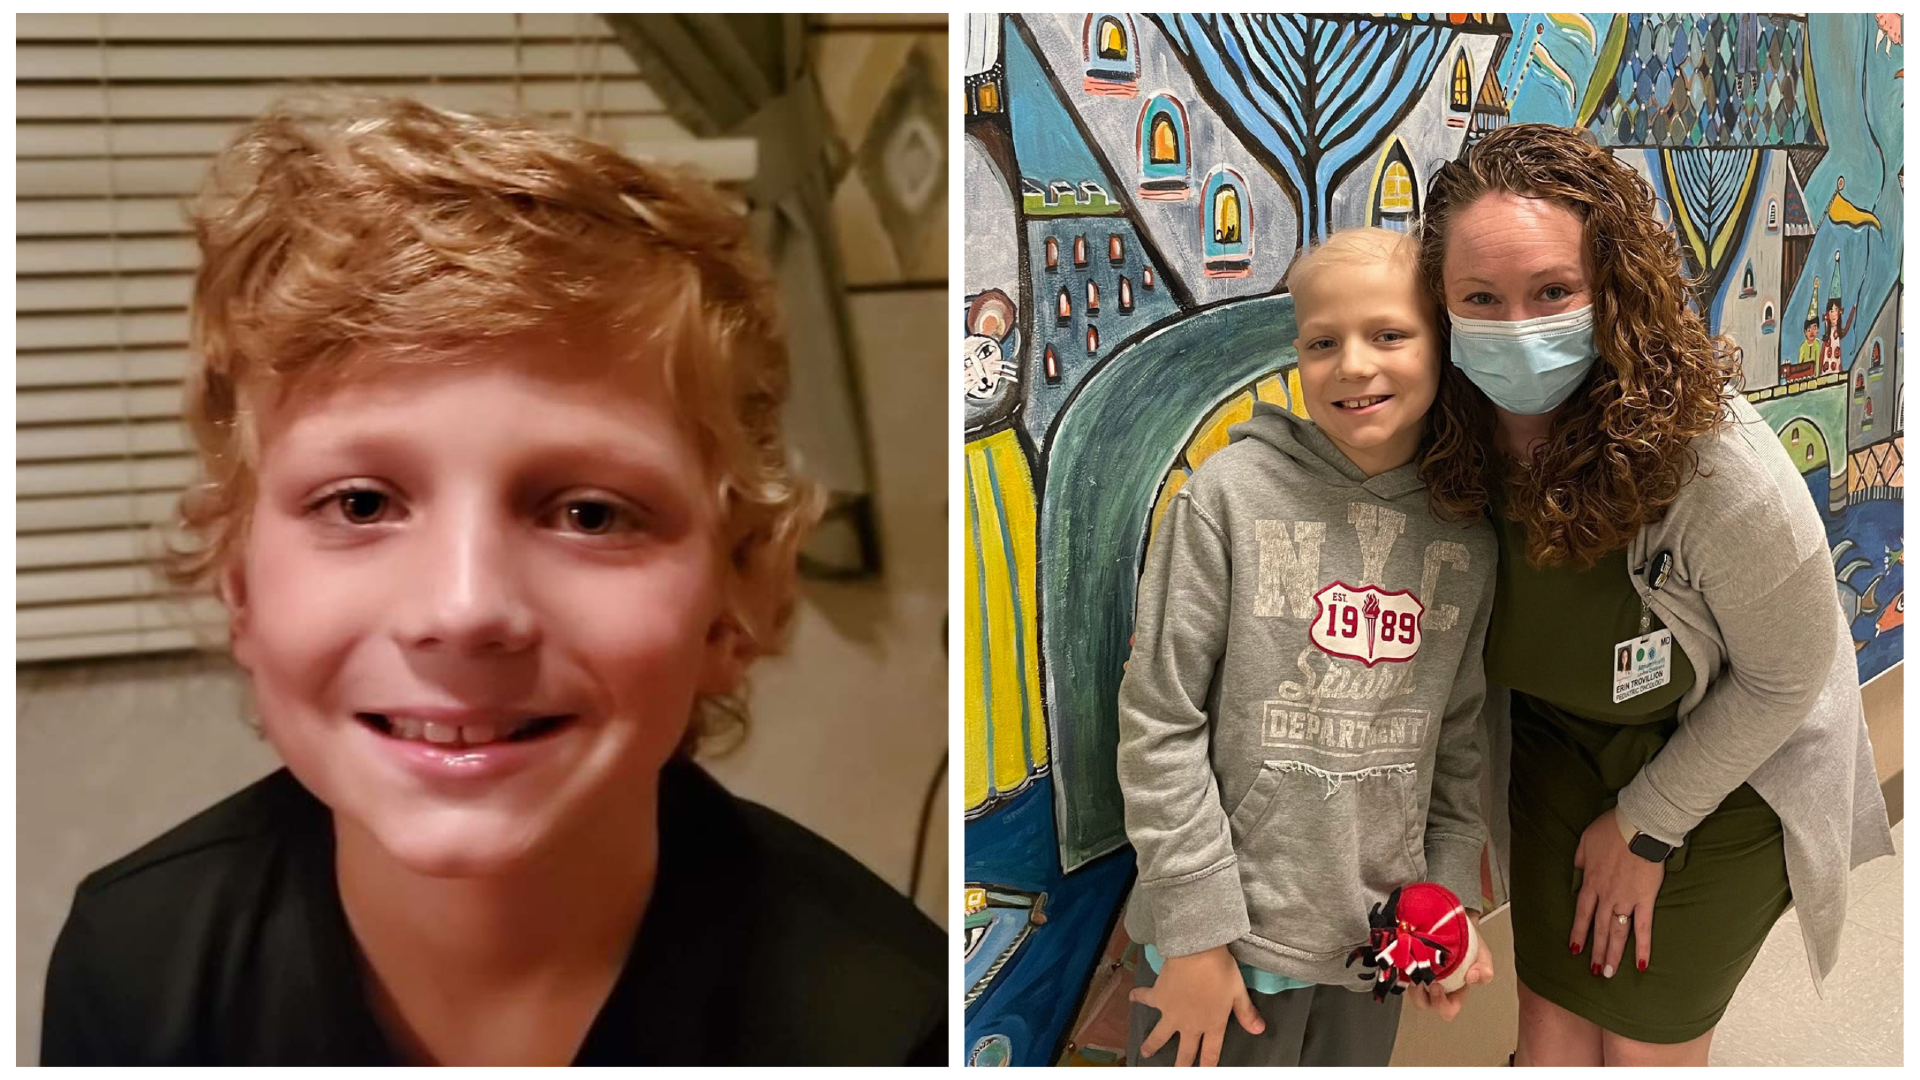 After seeking treatment at several facilities across many states, Collier and his mother, Kayla, learned about a new clinical trial for patients with rare childhood cancers, including diffuse intrinsic pontine glioma (DIPG) and recurrent neuroblastoma.